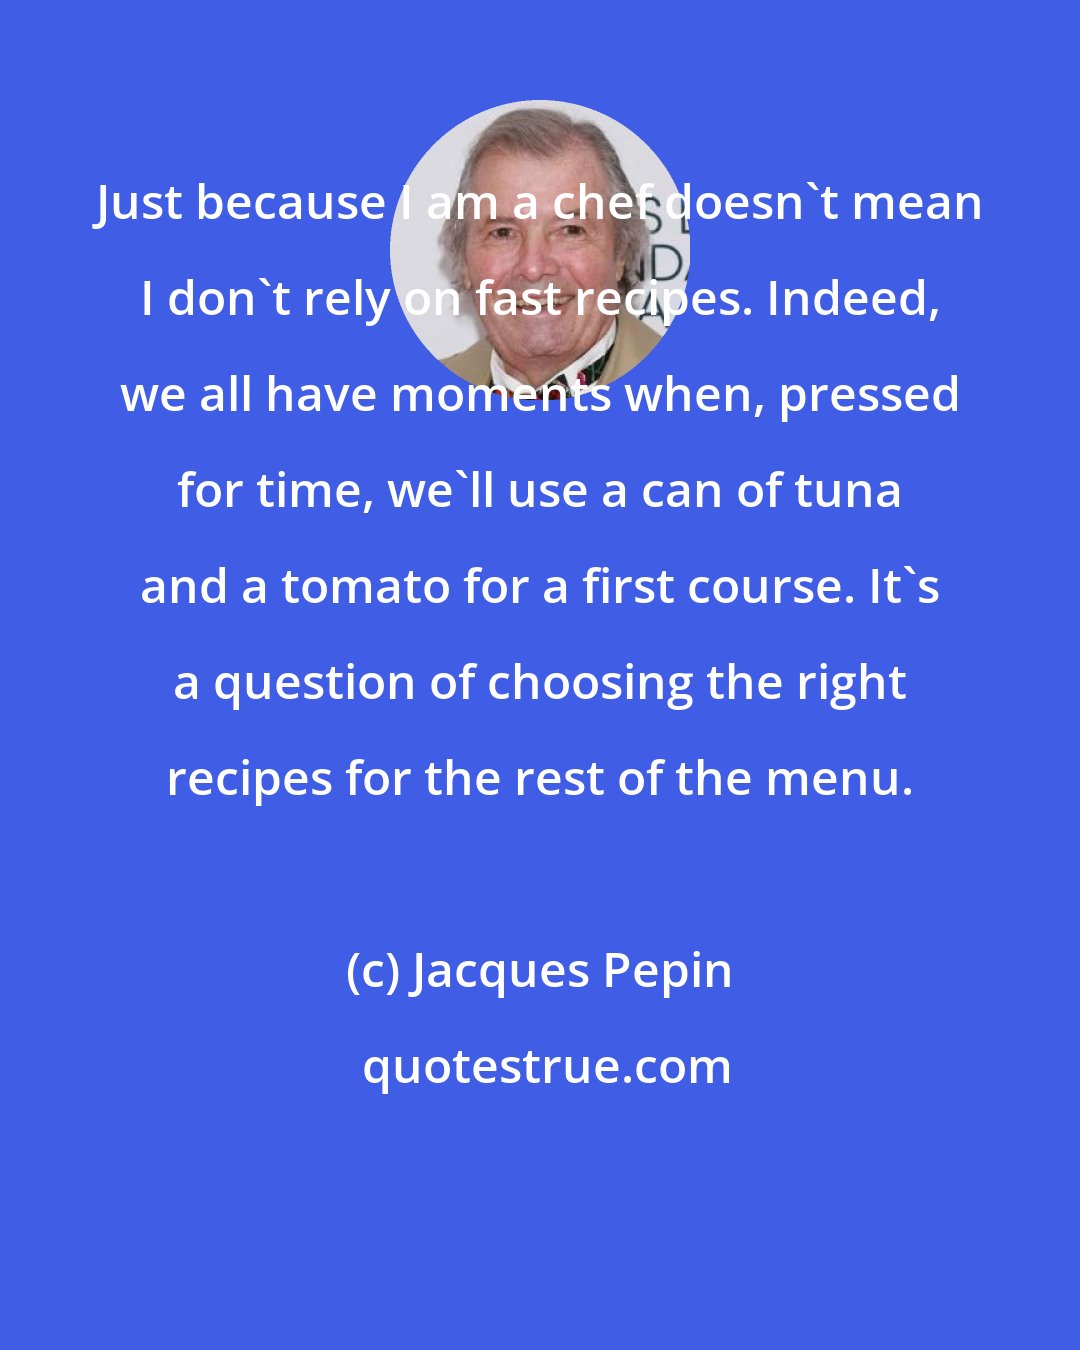 Jacques Pepin: Just because I am a chef doesn't mean I don't rely on fast recipes. Indeed, we all have moments when, pressed for time, we'll use a can of tuna and a tomato for a first course. It's a question of choosing the right recipes for the rest of the menu.